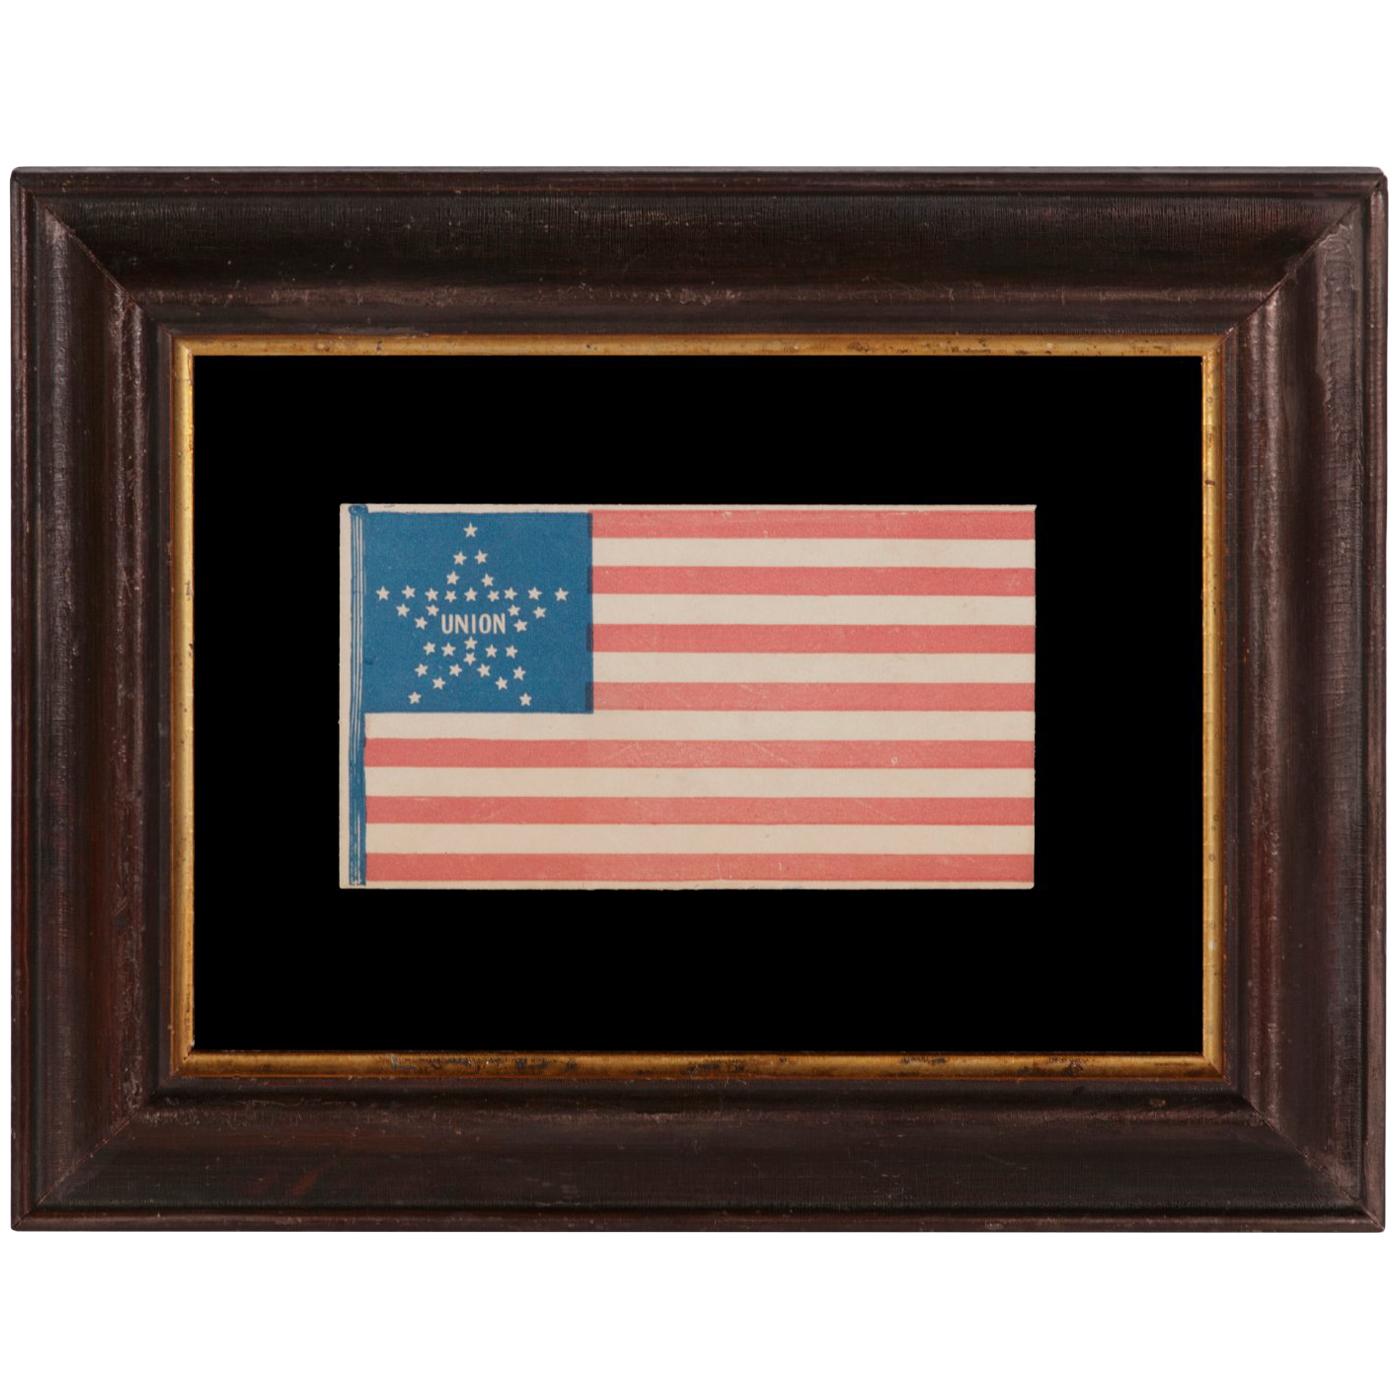 34 Star American Flag Cover with a Great Star Pattern